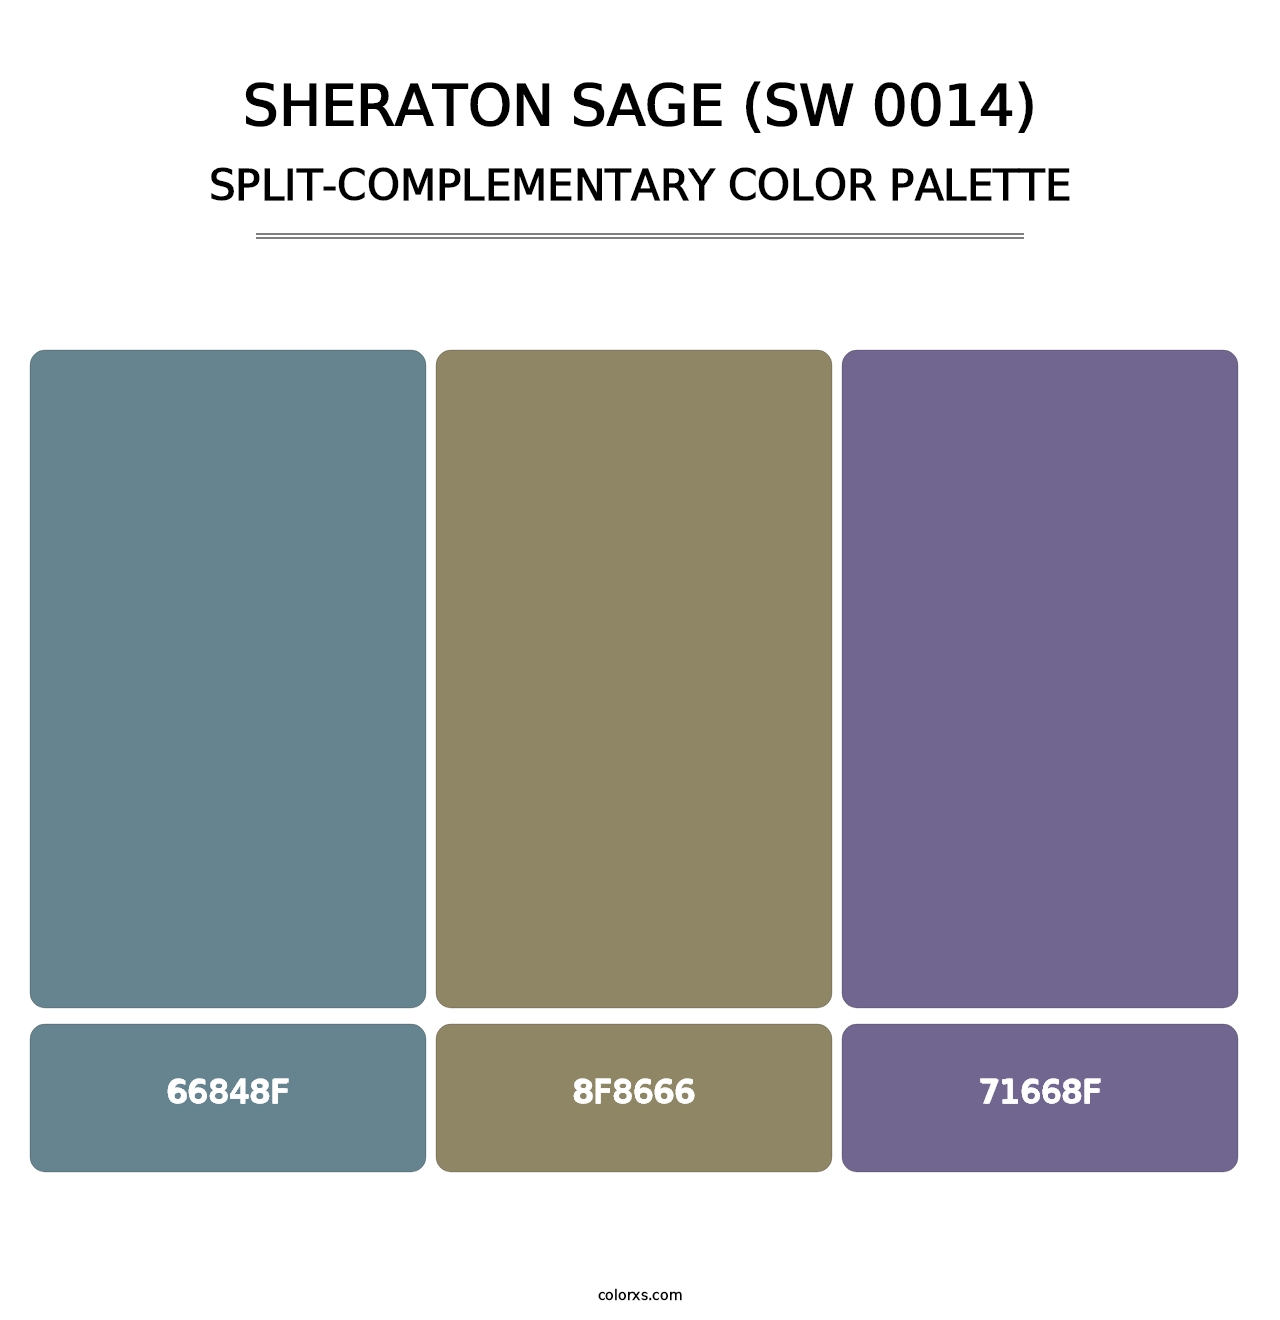 Sheraton Sage (SW 0014) - Split-Complementary Color Palette